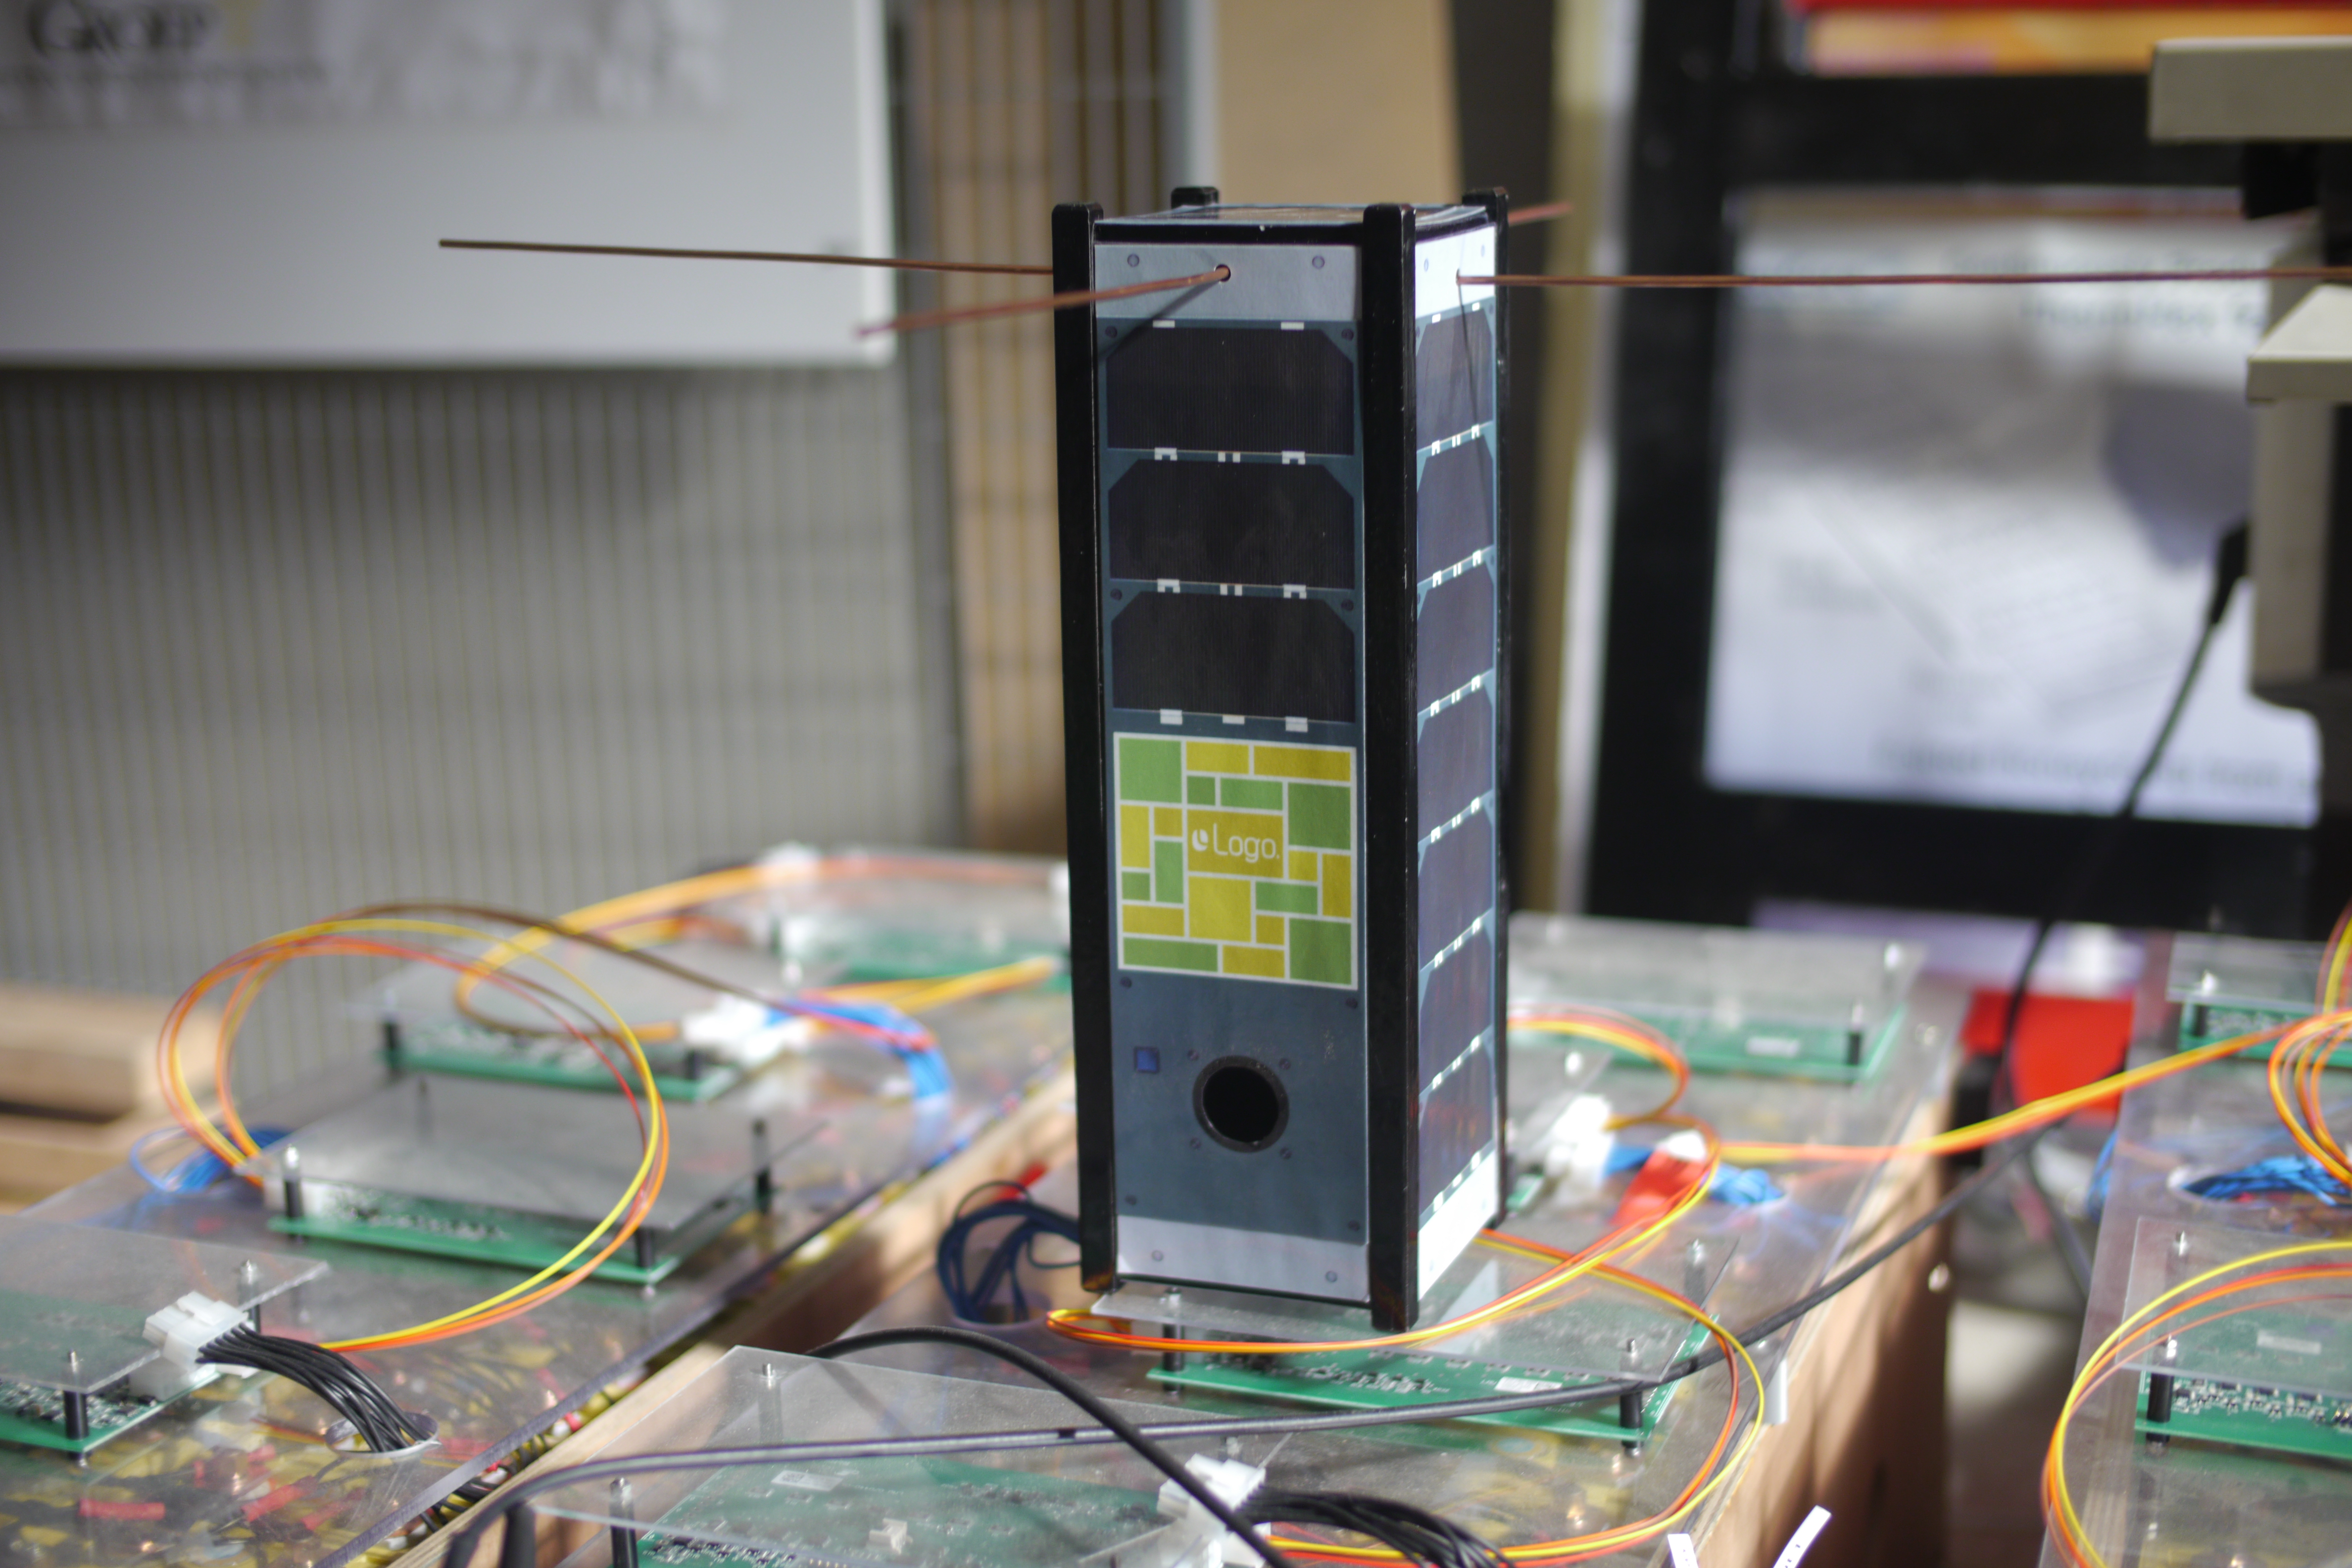 A mock-up of a CubeSat carrying an impression of the billboard, in an engineering lab.